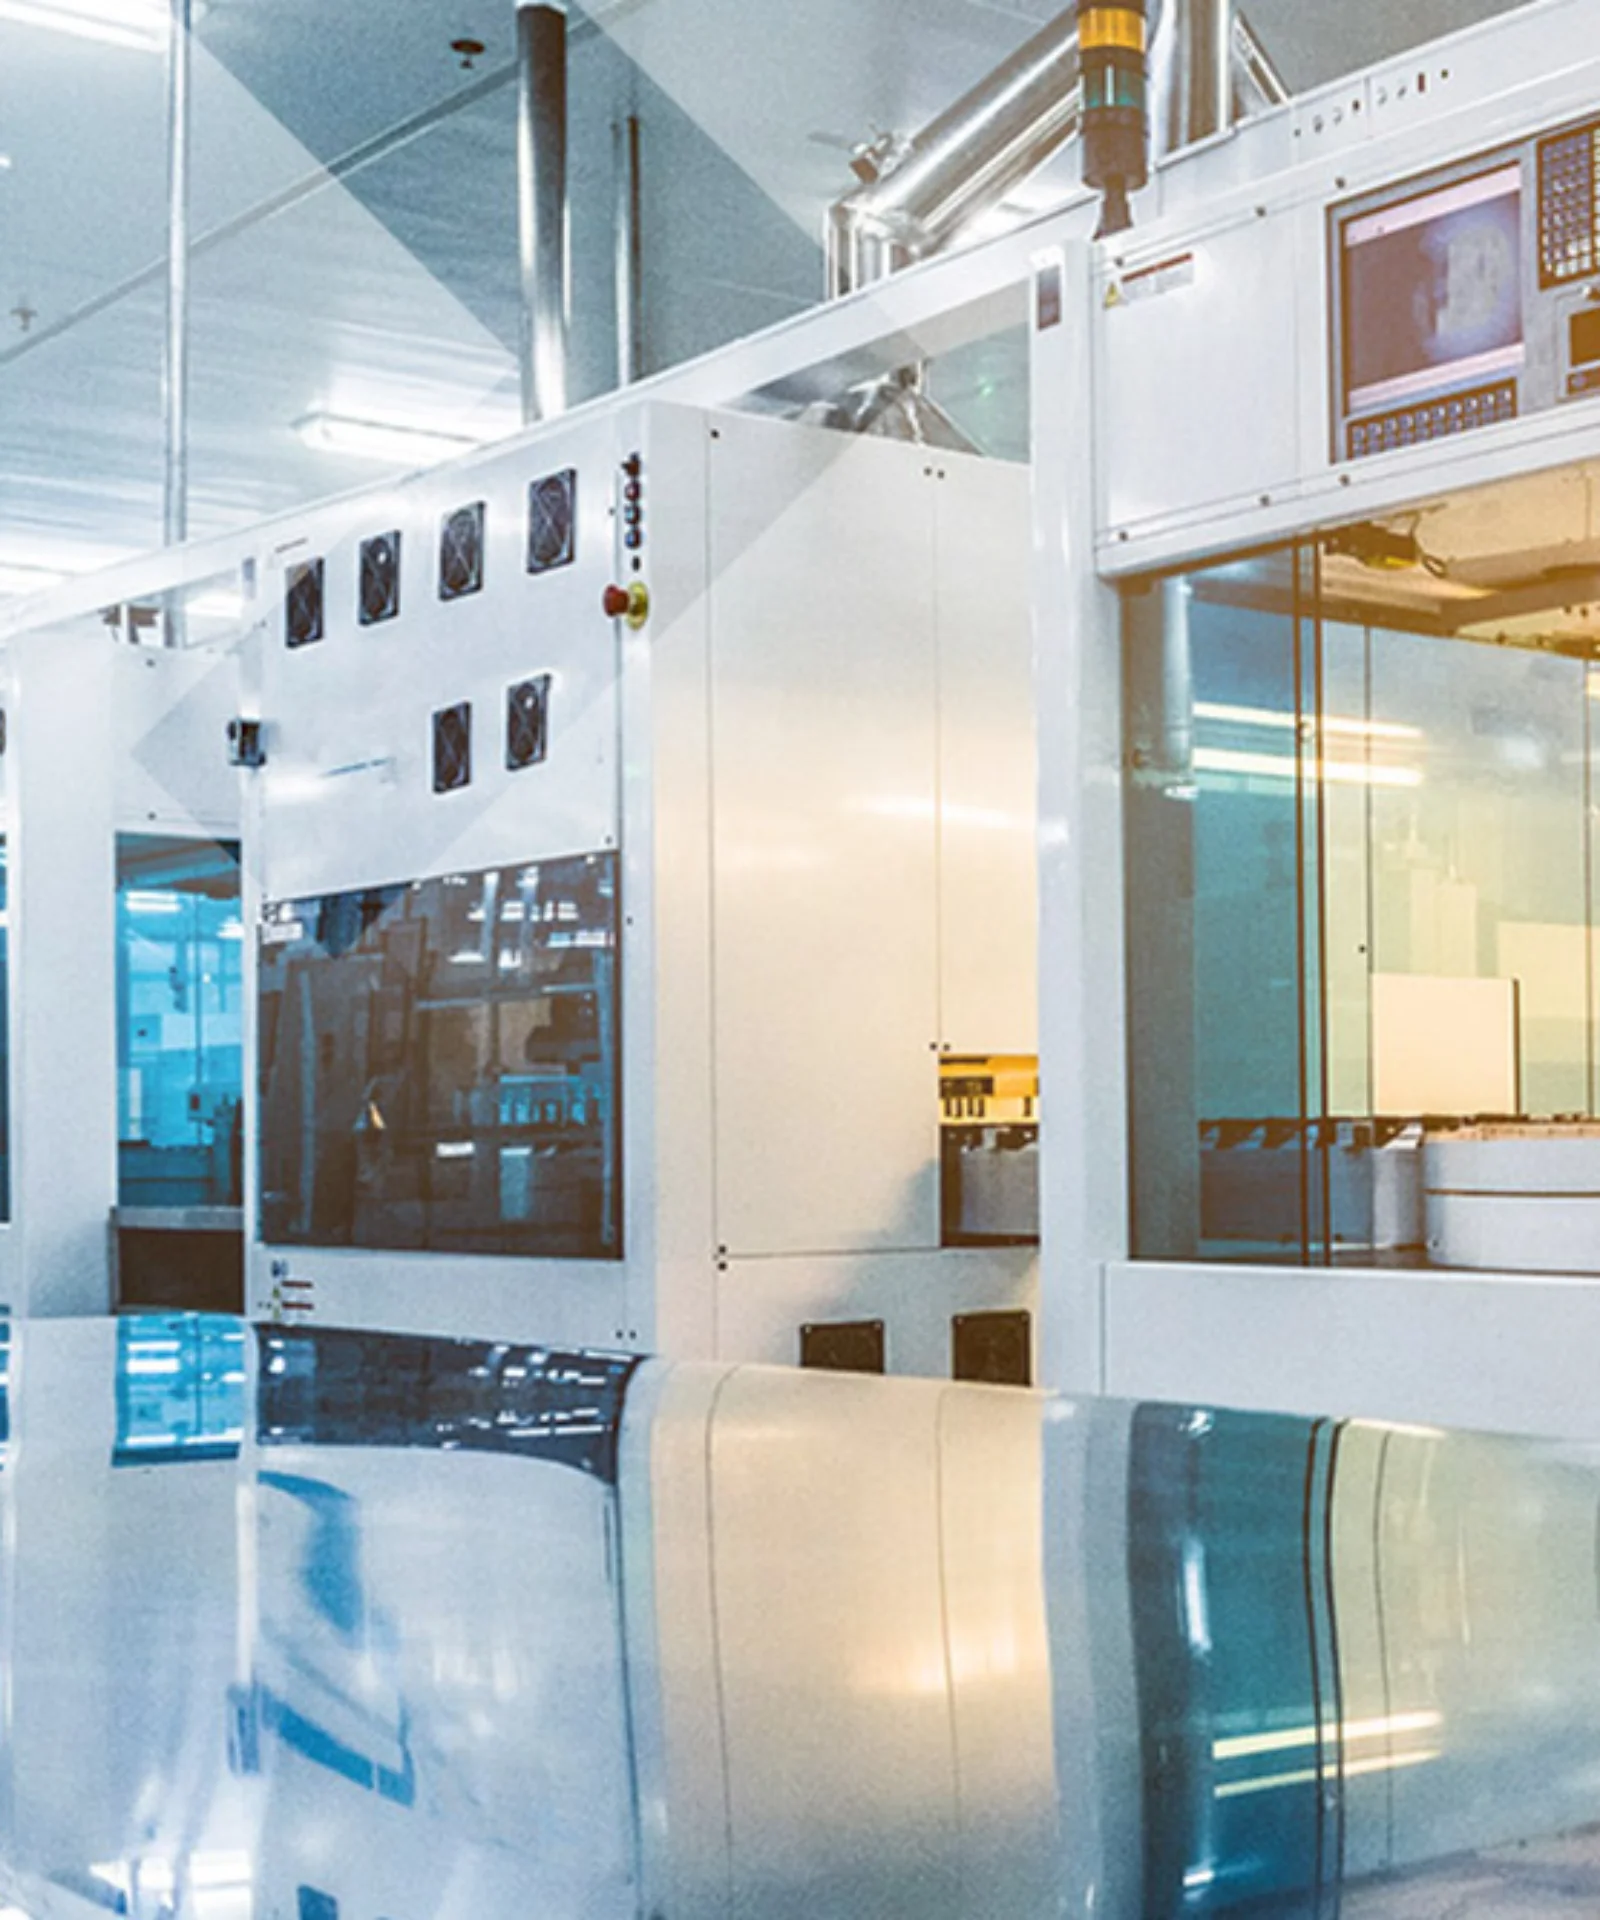 Explore the cutting-edge automated manufacturing facility featuring advanced machinery and high-tech equipment, highlighting innovation and efficiency in industrial production.